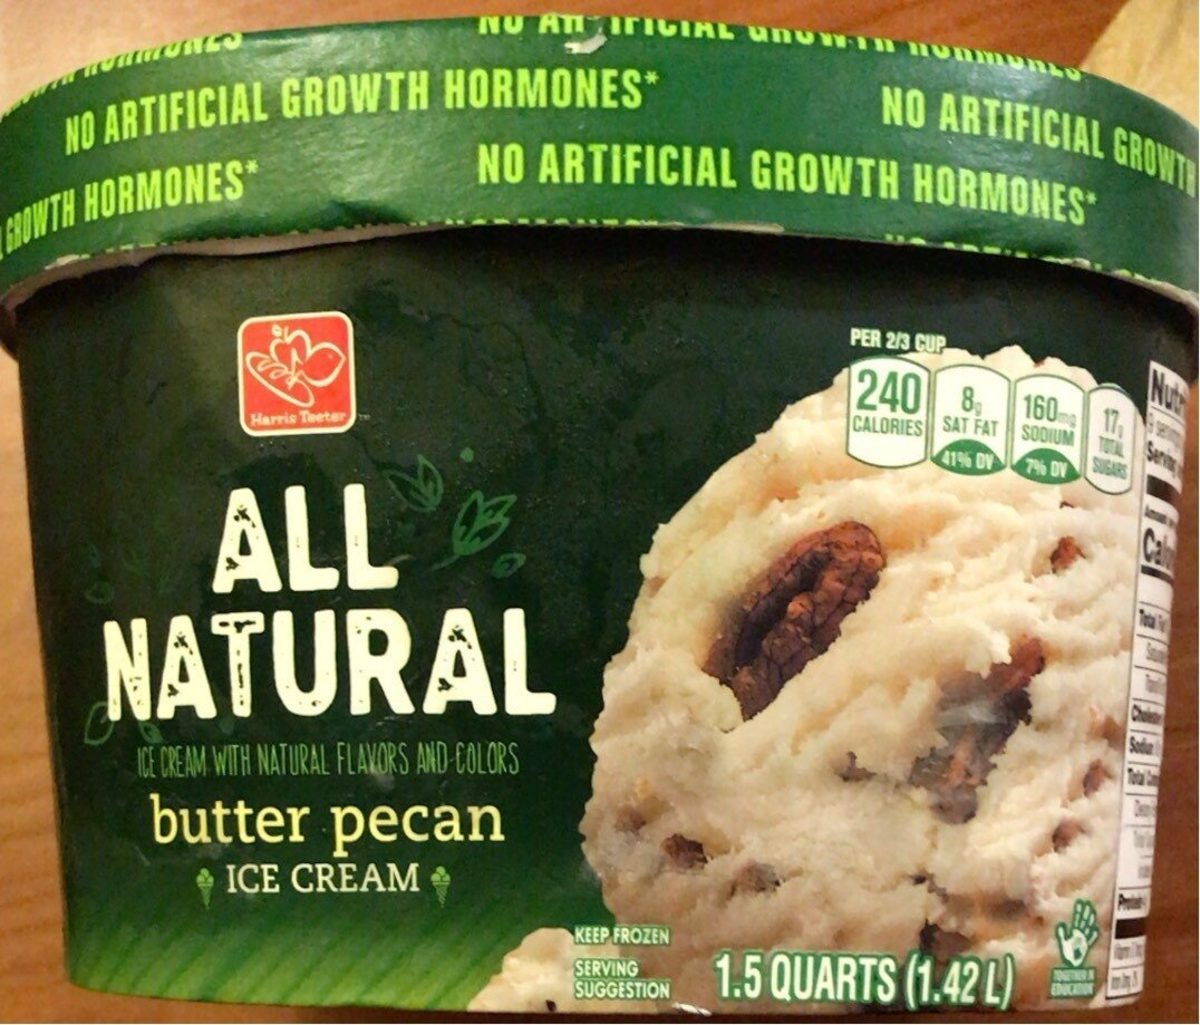 Aldi ice cream is terrible, but Harris Teeter All Natural Ice Cream is remarkably similar to Breyers, including the 5 or 6-item ingredient list.